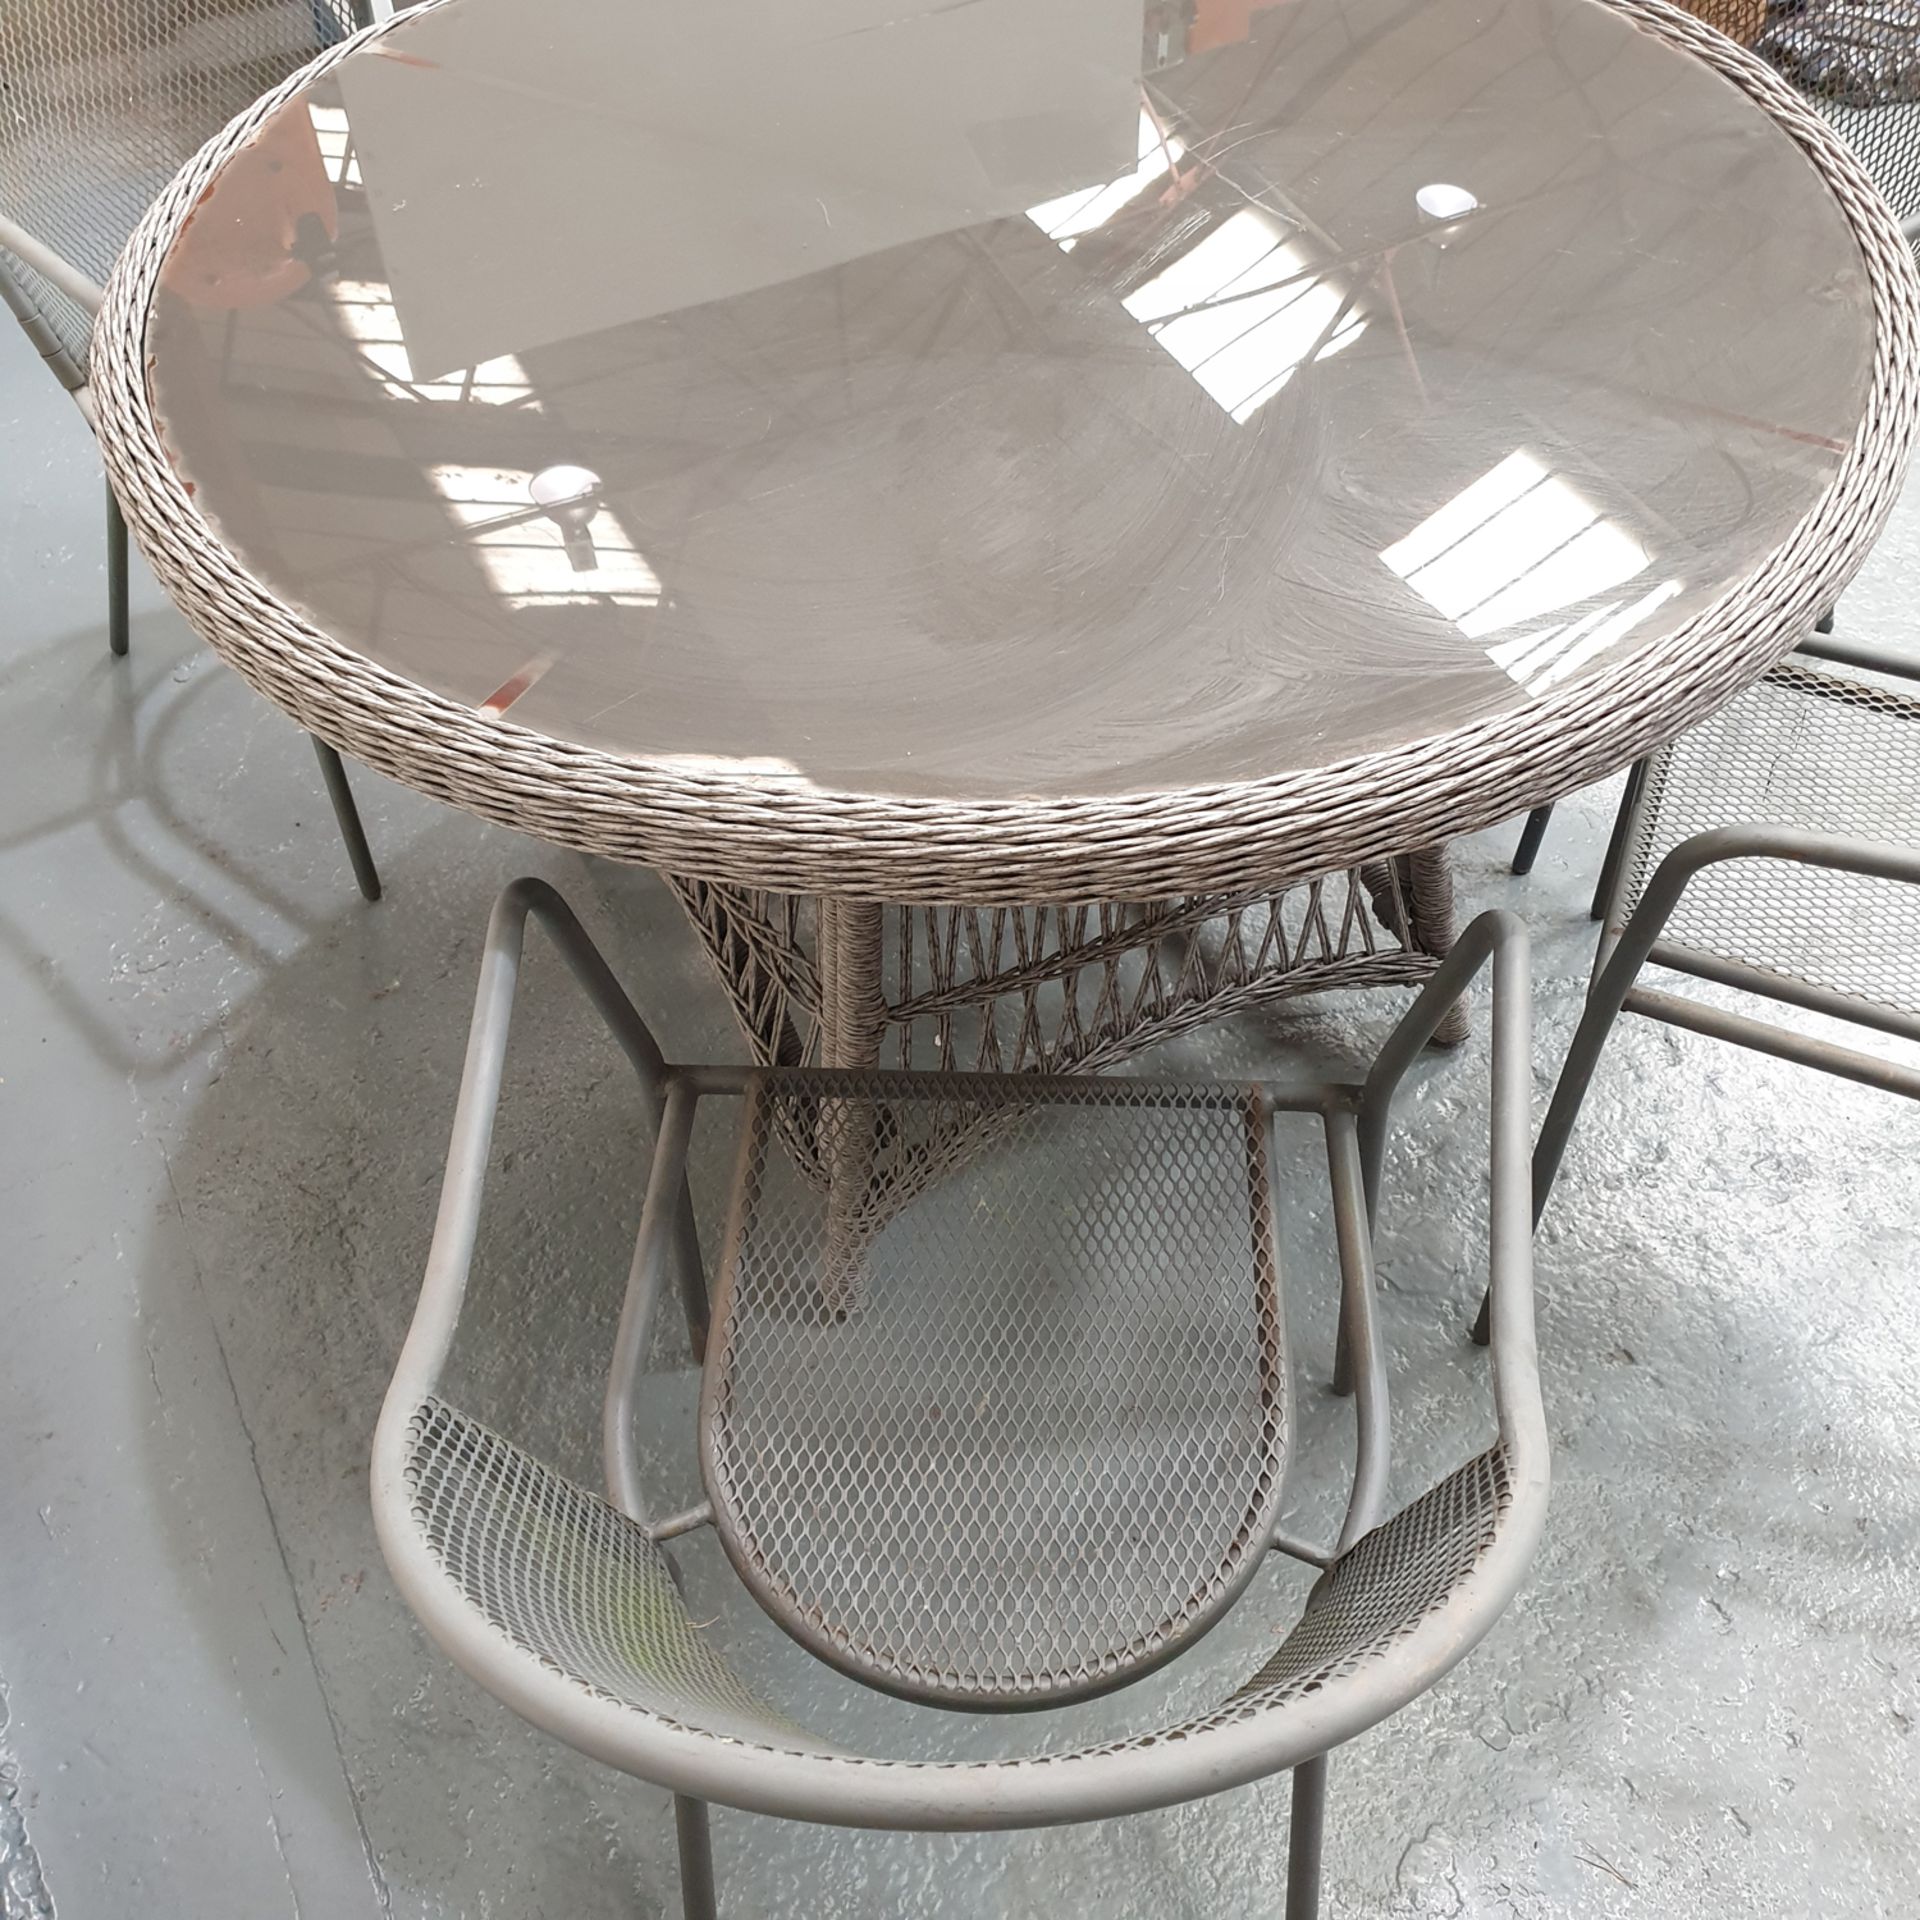 Outdoor Table with Glass Top. 5 x Metal Chairs. - Image 5 of 5